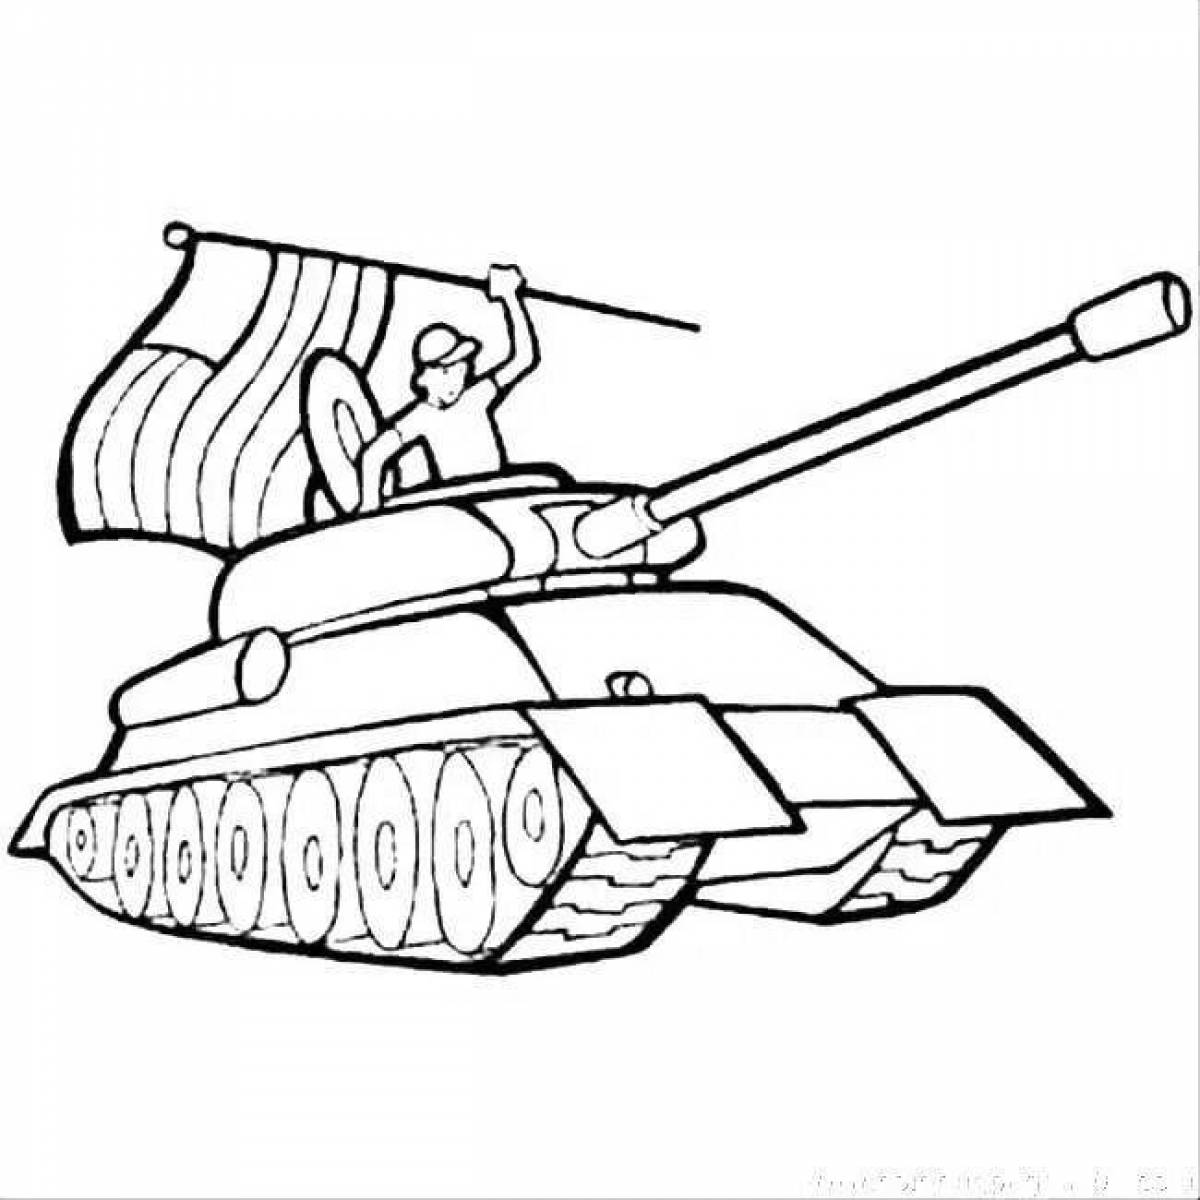 Great tanker coloring book for kids